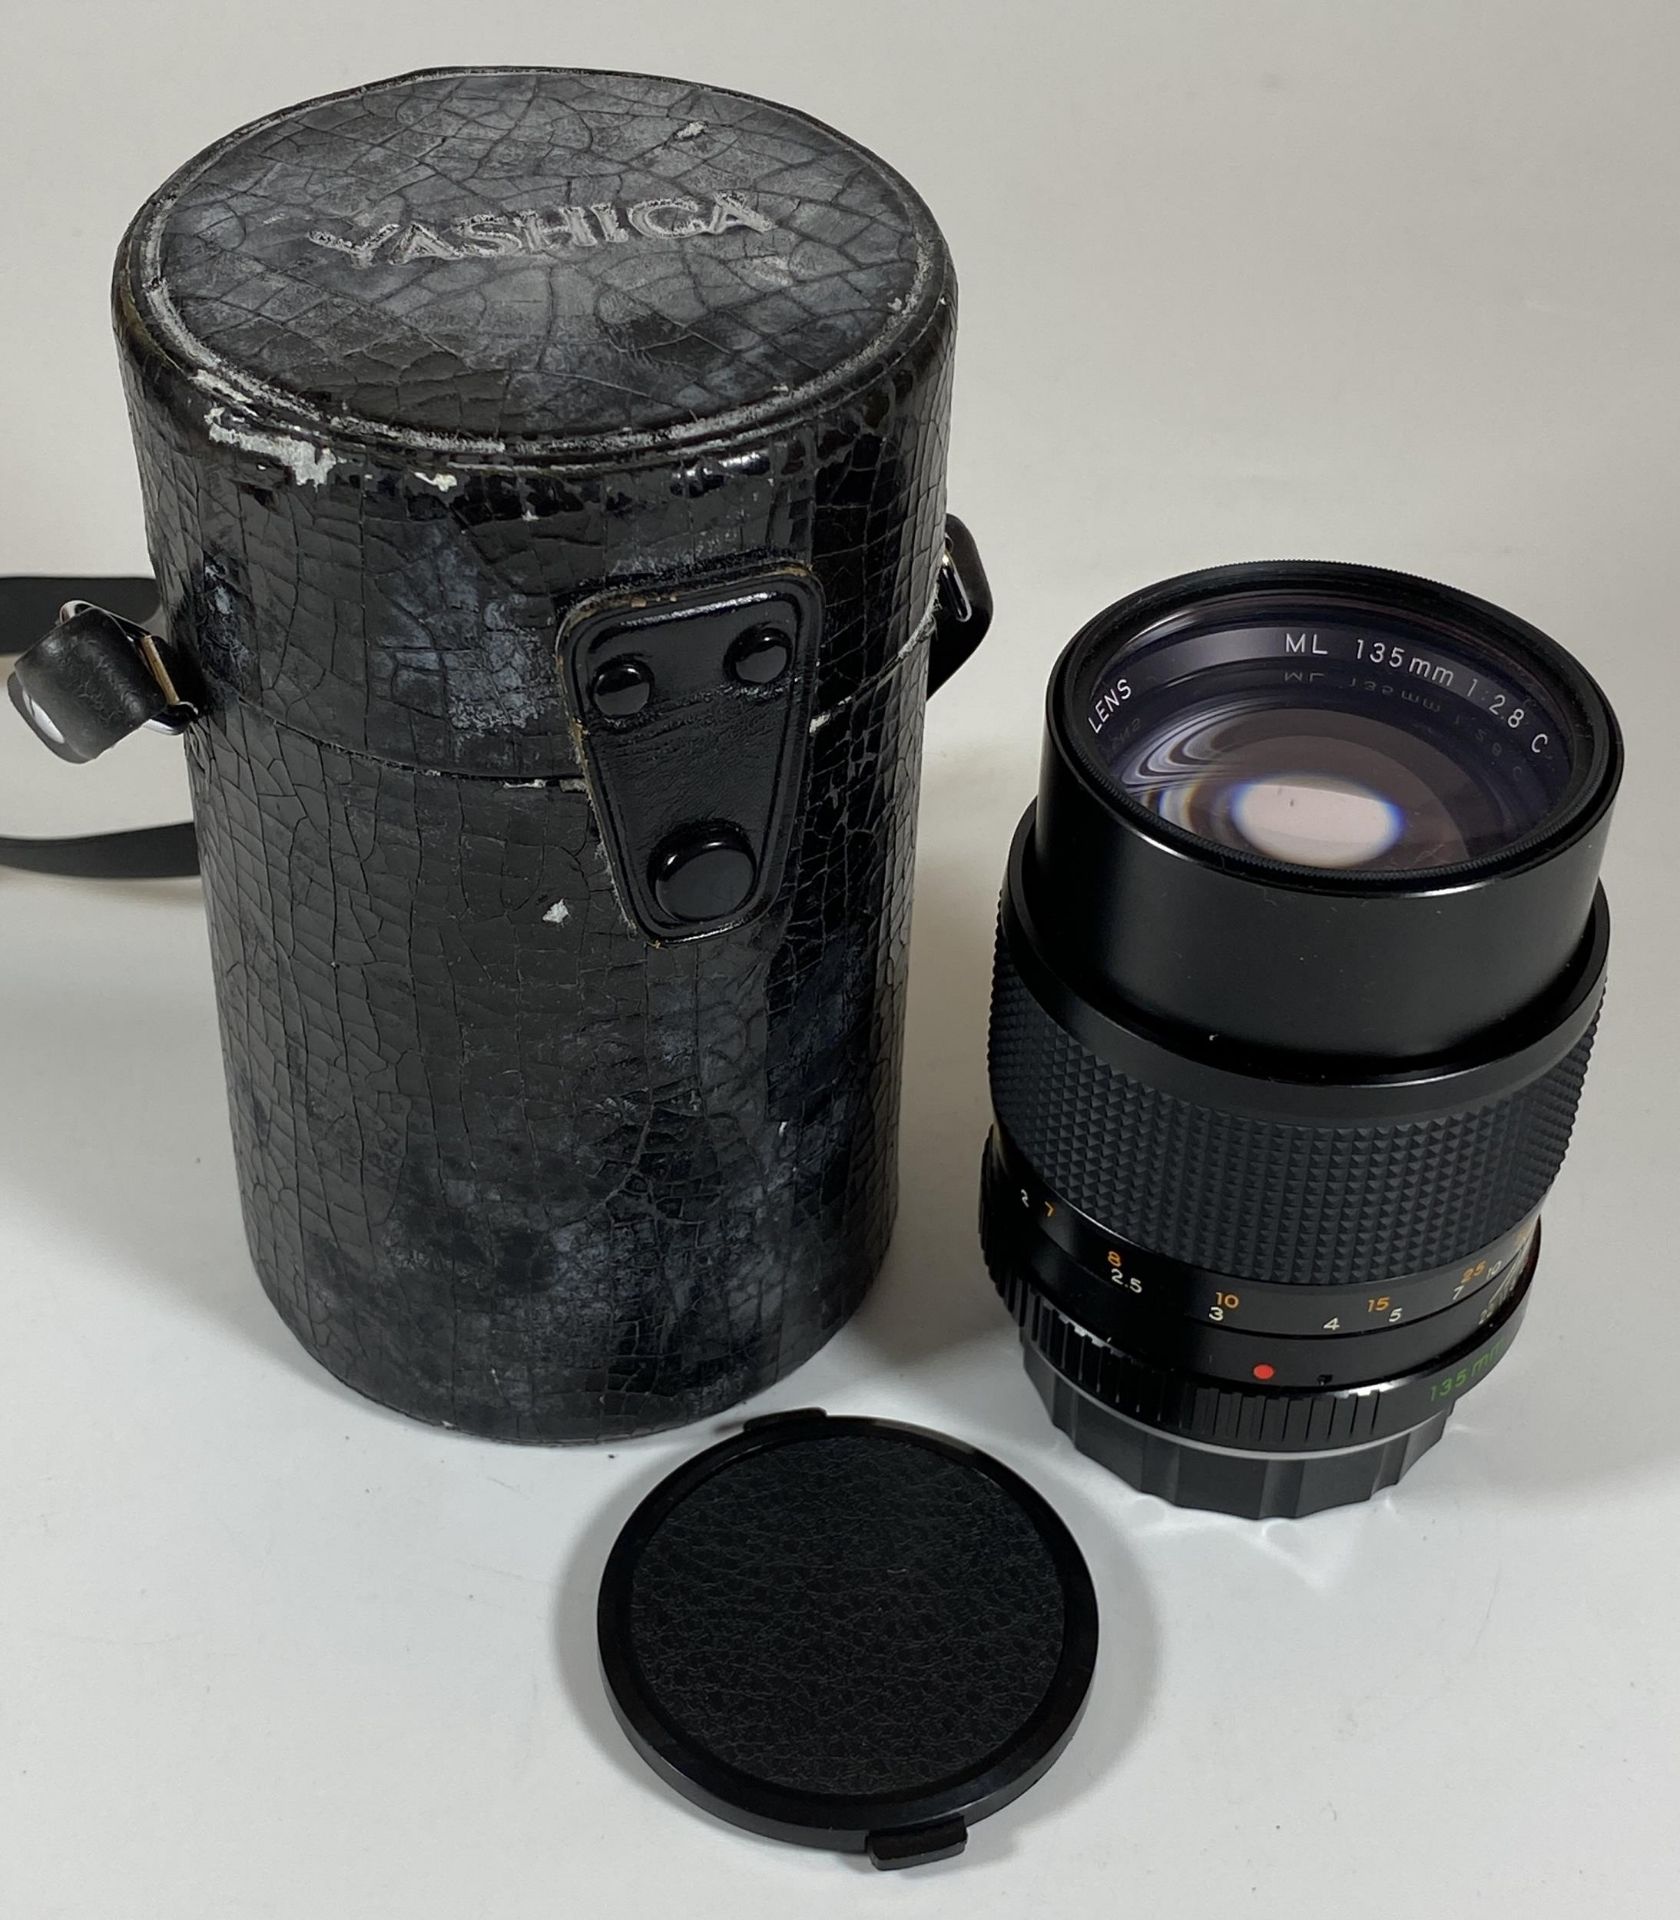 A VINTAGE YASHICA YASHINON ML 135MM 1:2.8 C CAMERA LENS IN CASE